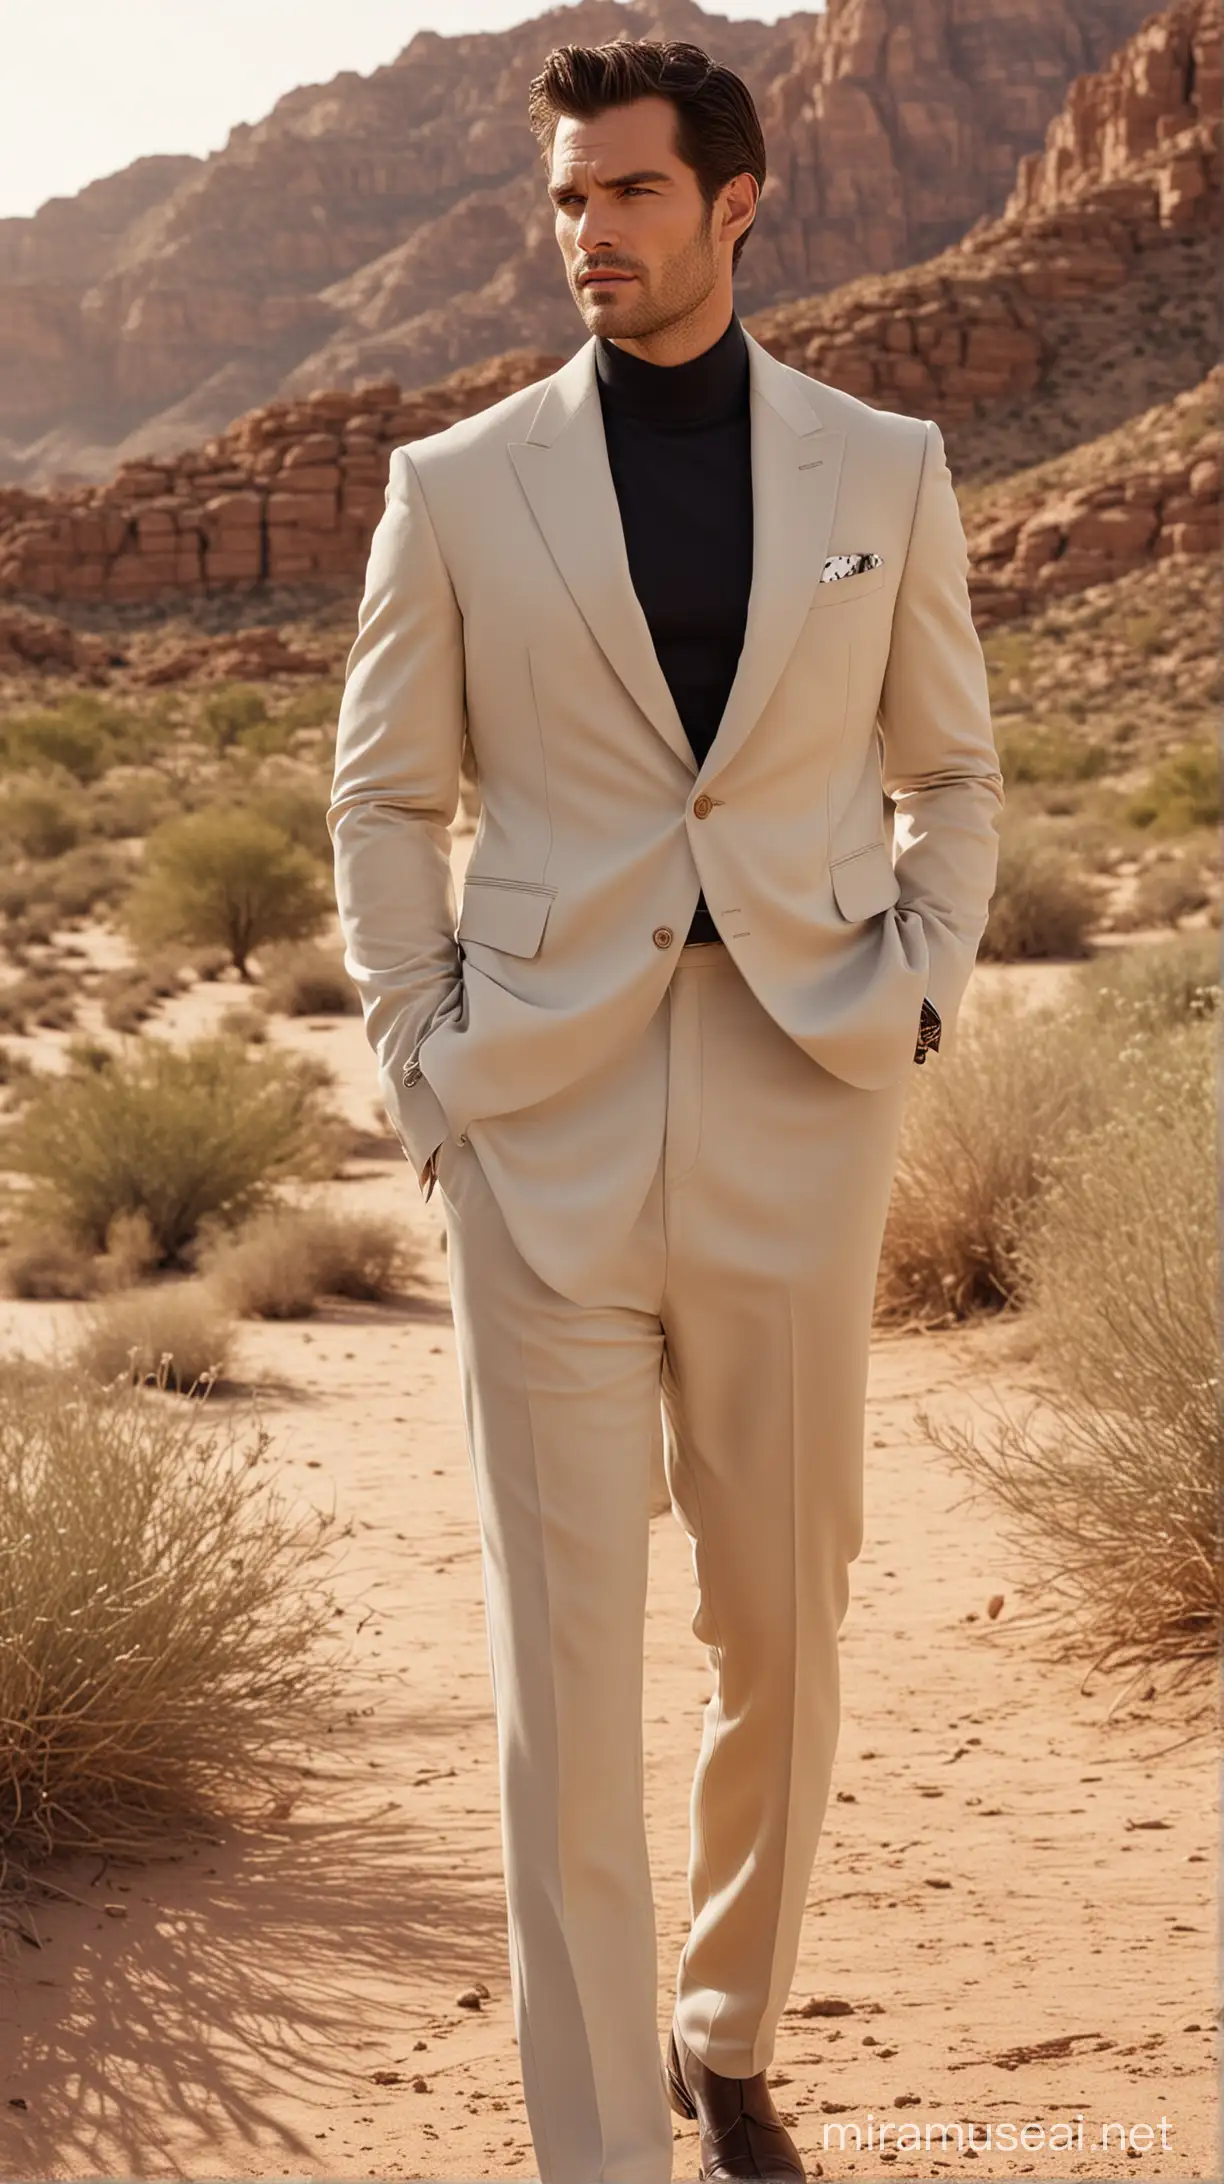 Title: "Desert Elegance: Hugo Boss's Exclusive Men's Fashion Campaign"

Nestled within the desert's captivating scenery, Hugo Boss presents its latest men's collection, marrying sophistication with the rugged allure of nature. Mark Vanderloo and Henry Cavill epitomize confidence in impeccably tailored suits, reminiscent of Hugo Boss's iconic style.

Amidst the desert backdrop, the campaign features structured blazers and sleek trousers, each piece reflecting Hugo Boss's unparalleled craftsmanship. The interplay of light and shadow accentuates the garments' luxurious textures, creating an atmosphere of refined elegance.

As the sun casts its golden glow across the contemporary desert retreat, Hugo Boss invites you to experience the fusion of timeless sophistication and modern allure. Join us in embracing the essence of refined living amidst the desert's timeless beauty.
